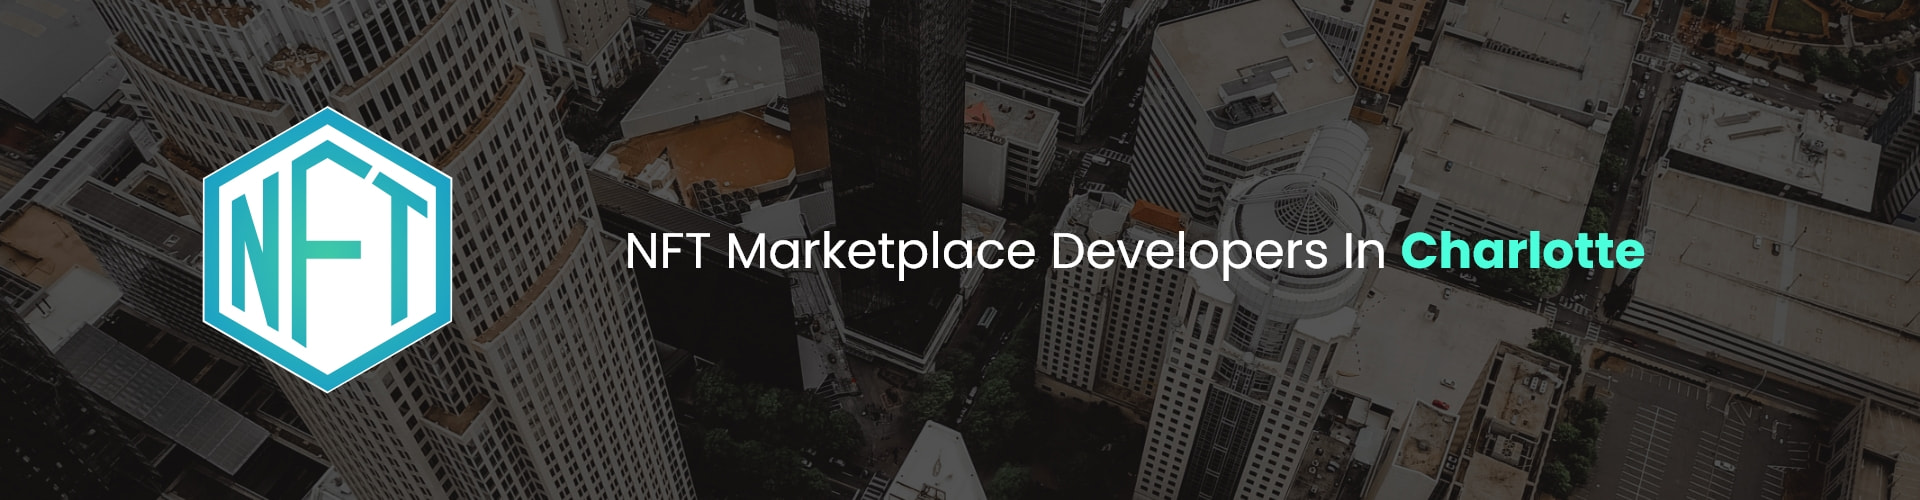 hire nft marketplace developers in charlotte